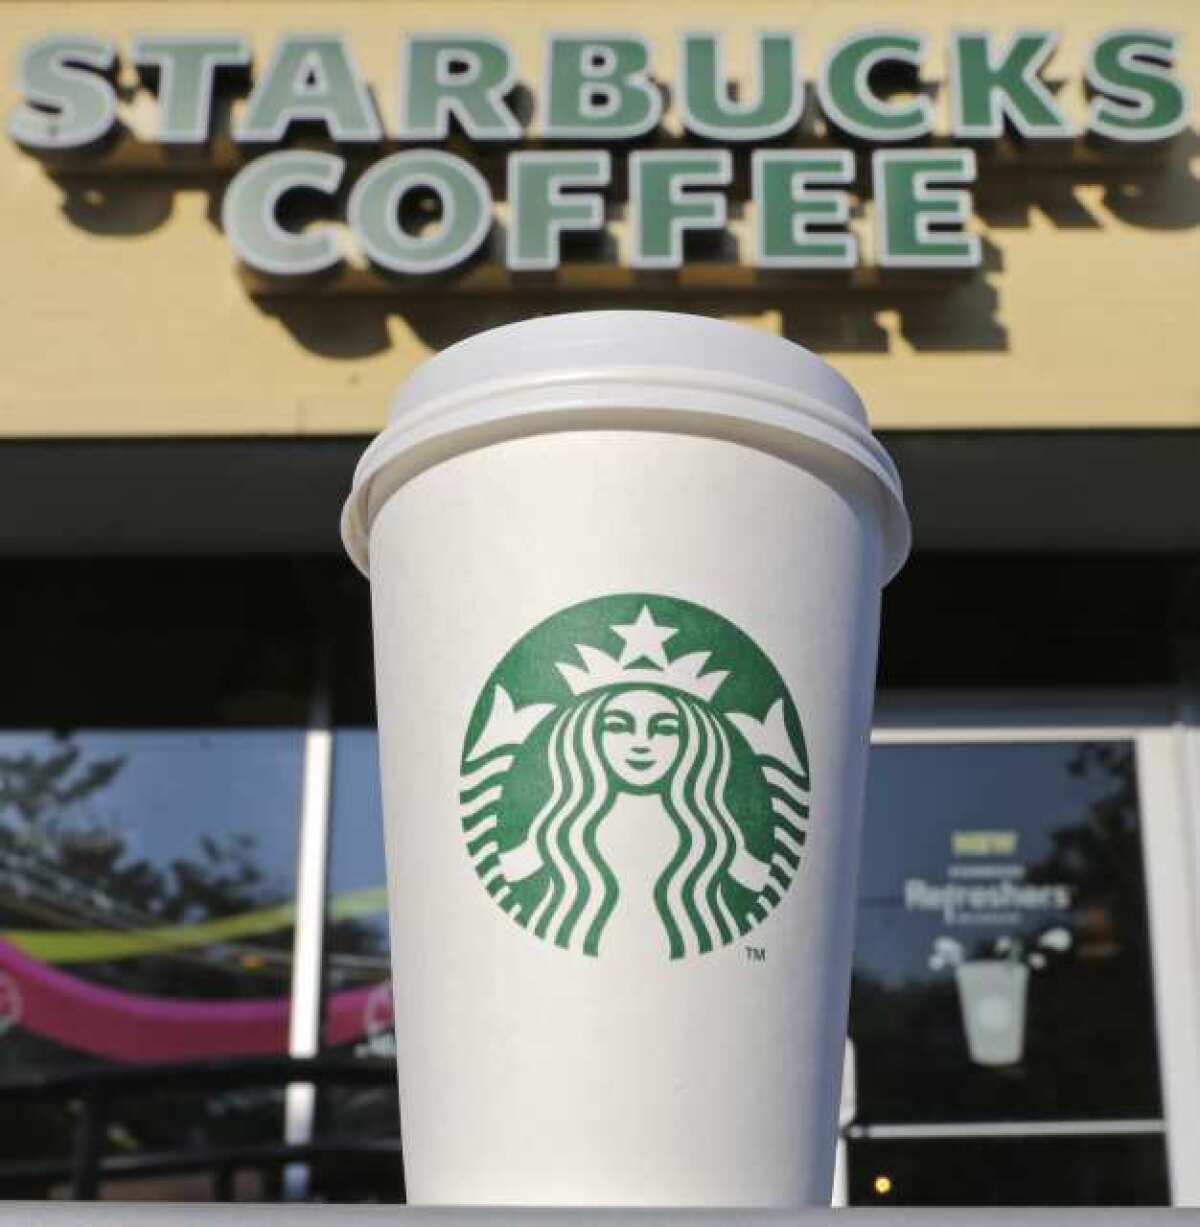 Gay marriage advocates are planning to show their support for companies such as Starbucks on Tuesday to counteract the effect of Chick-fil-A Appreciation Day.